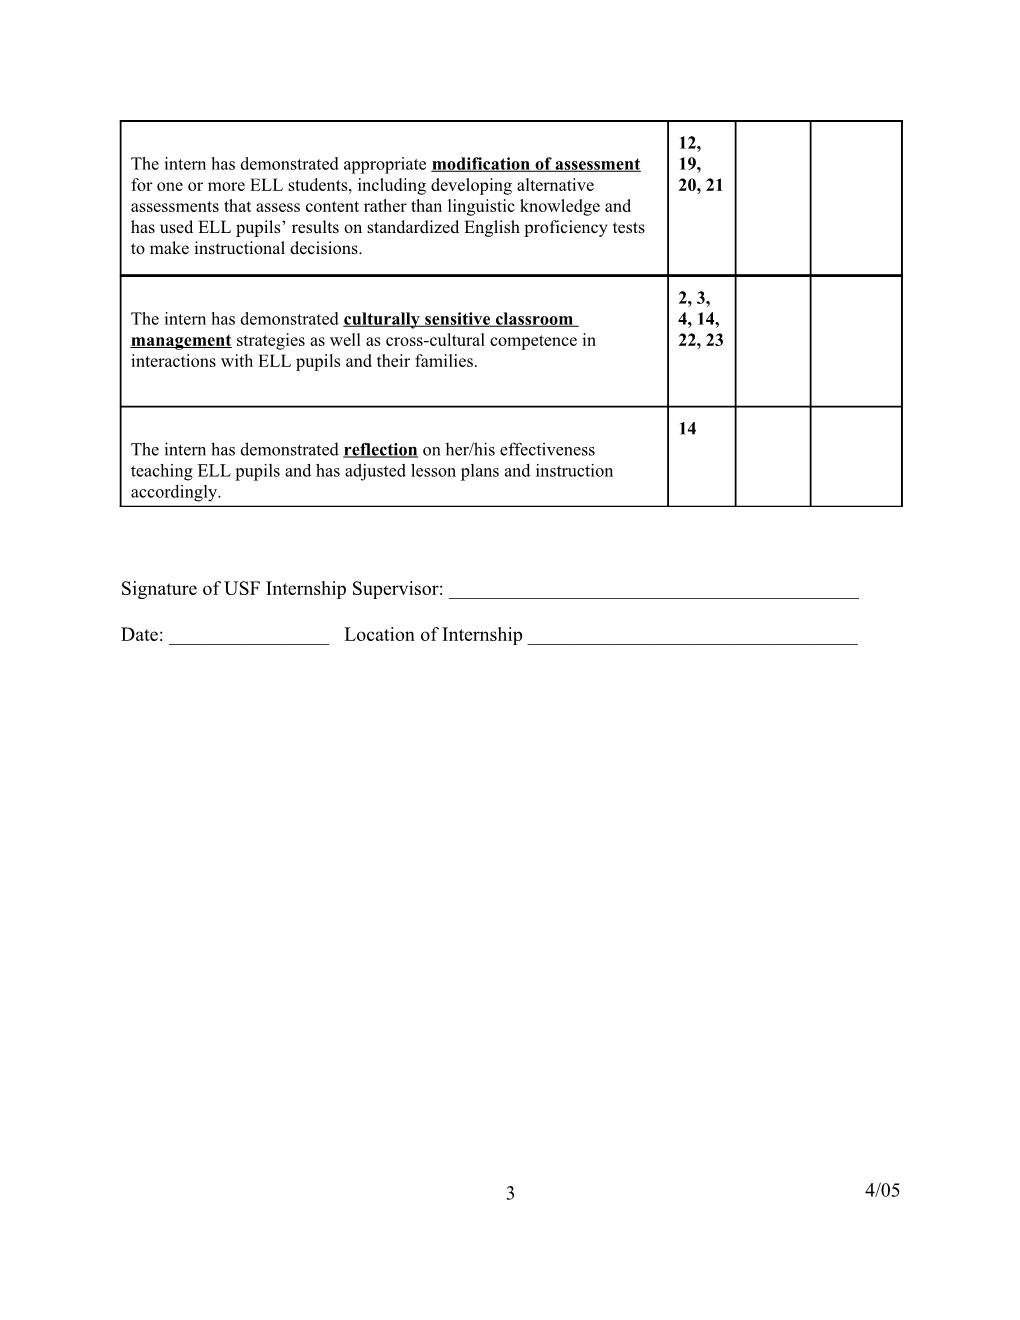 ESOL Late Field Experience Evaluation Form